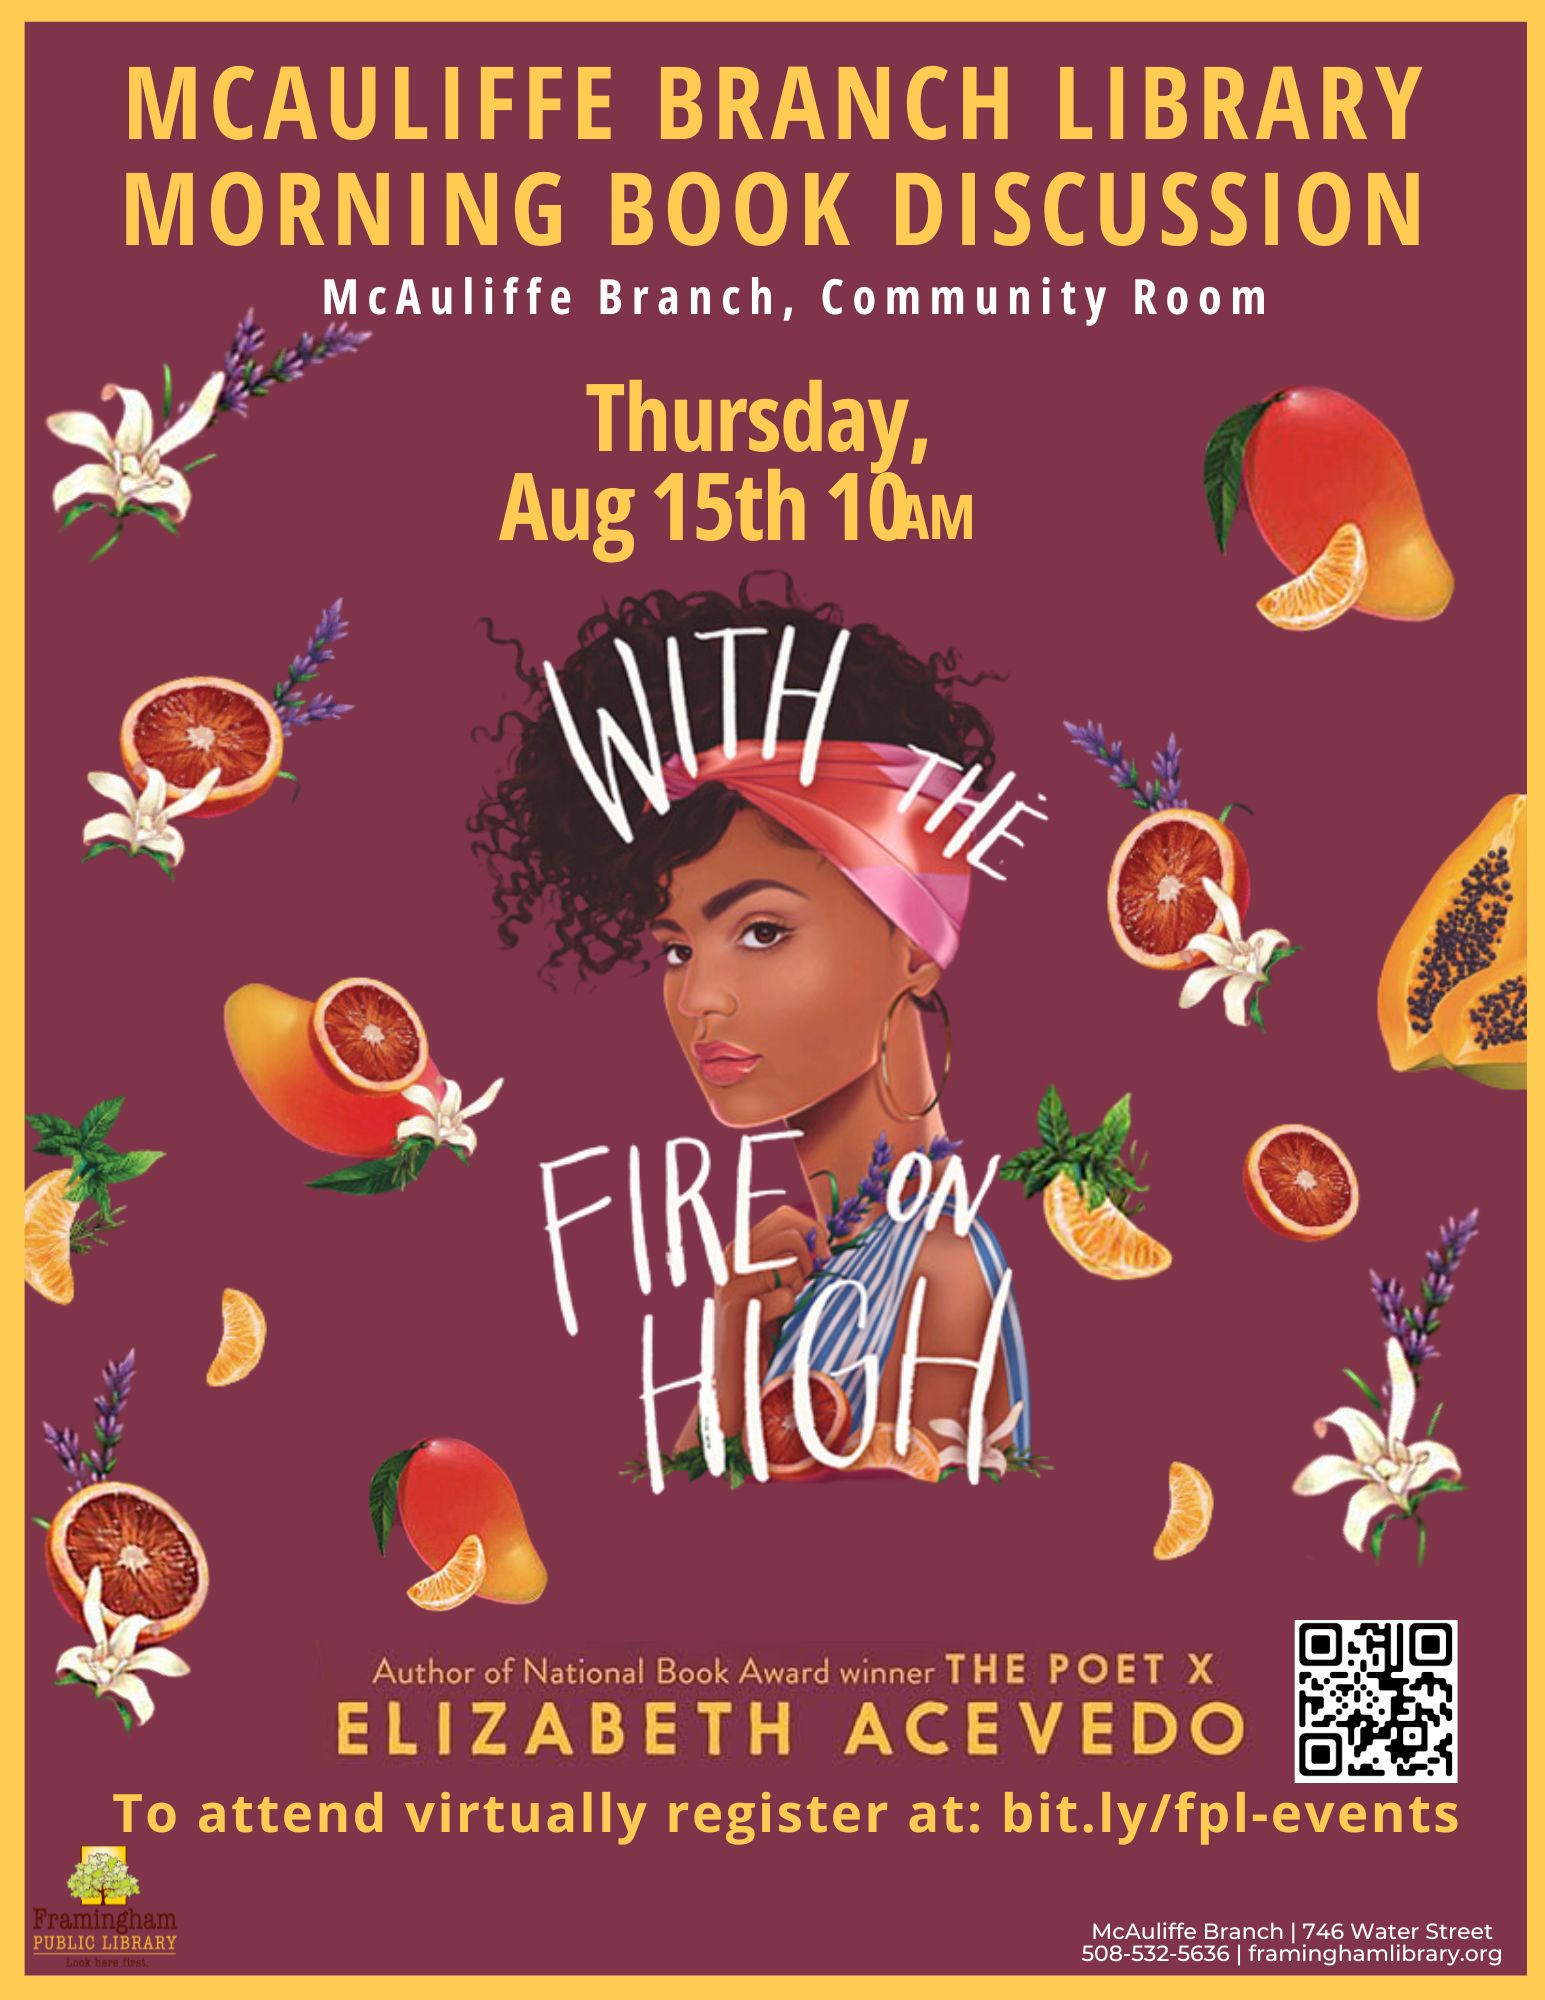 McAuliffe Morning Book Club: With the Fire on High by Elizabeth Acevedo thumbnail Photo